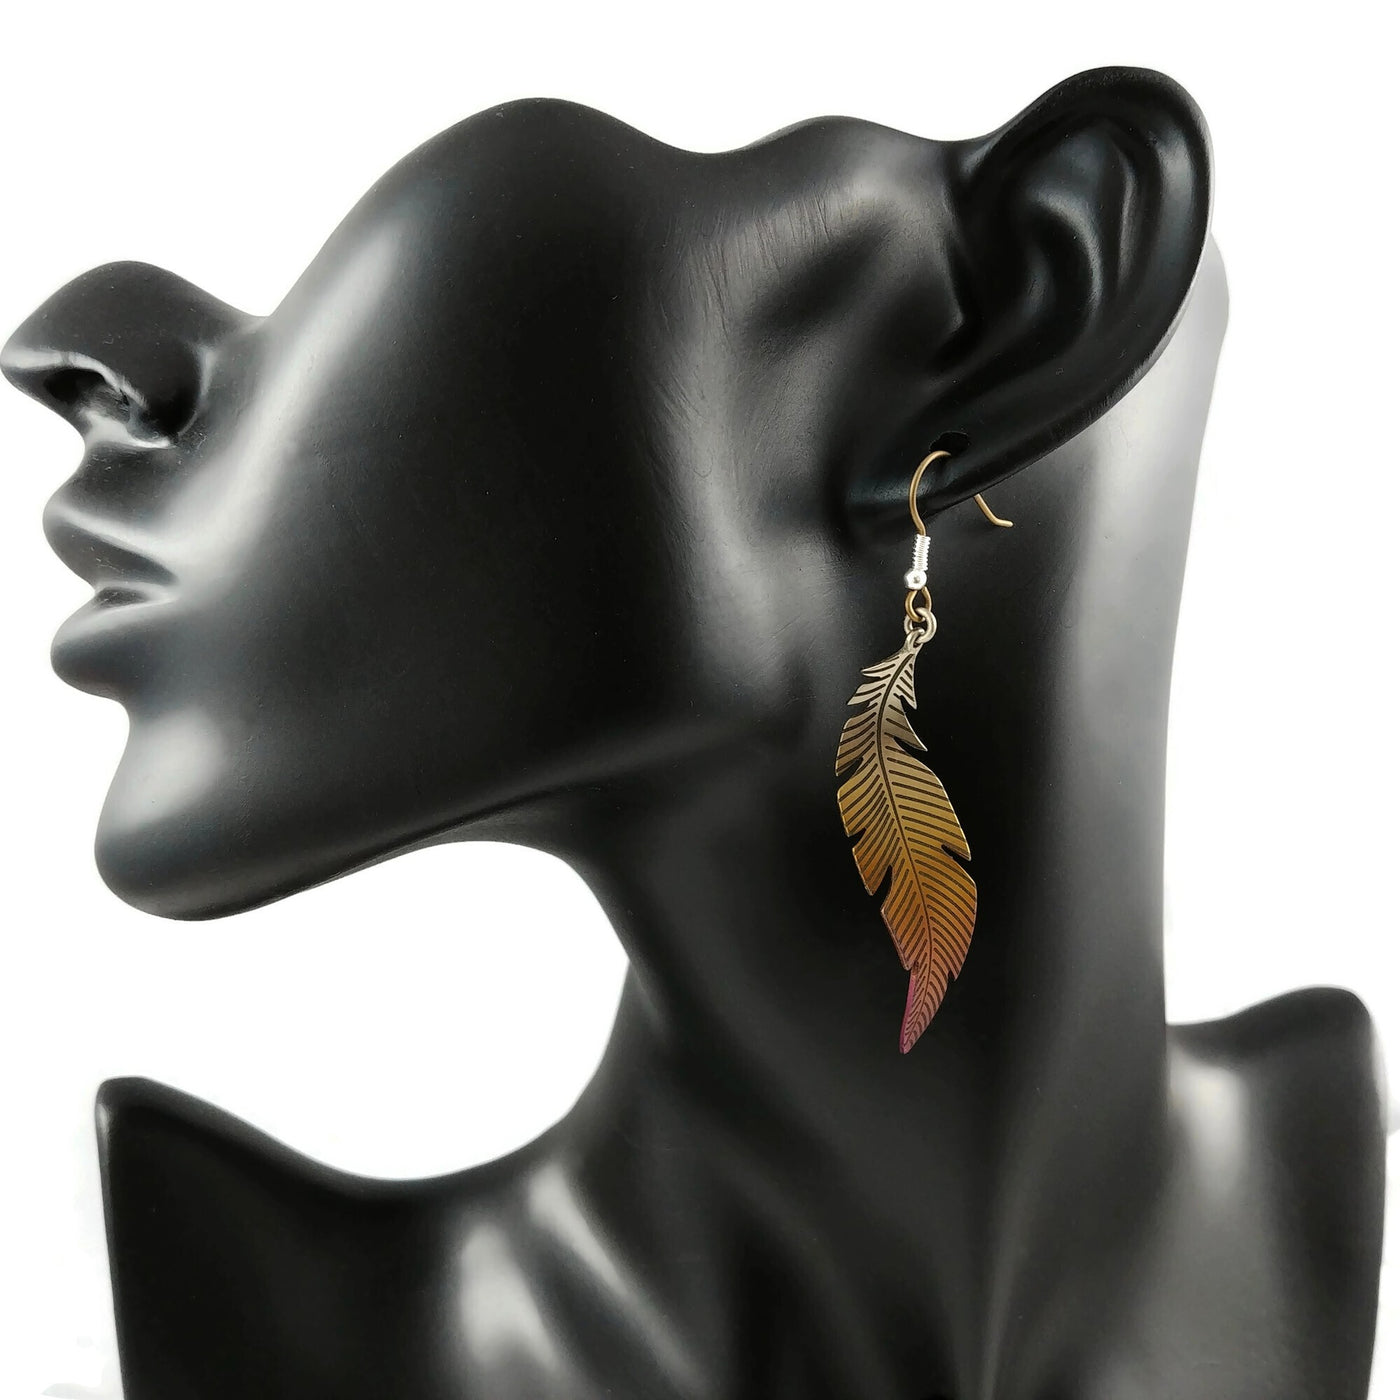 Large Curved Feather Titanium Earrings, 100% Hypoallergenic, Sensitive ear